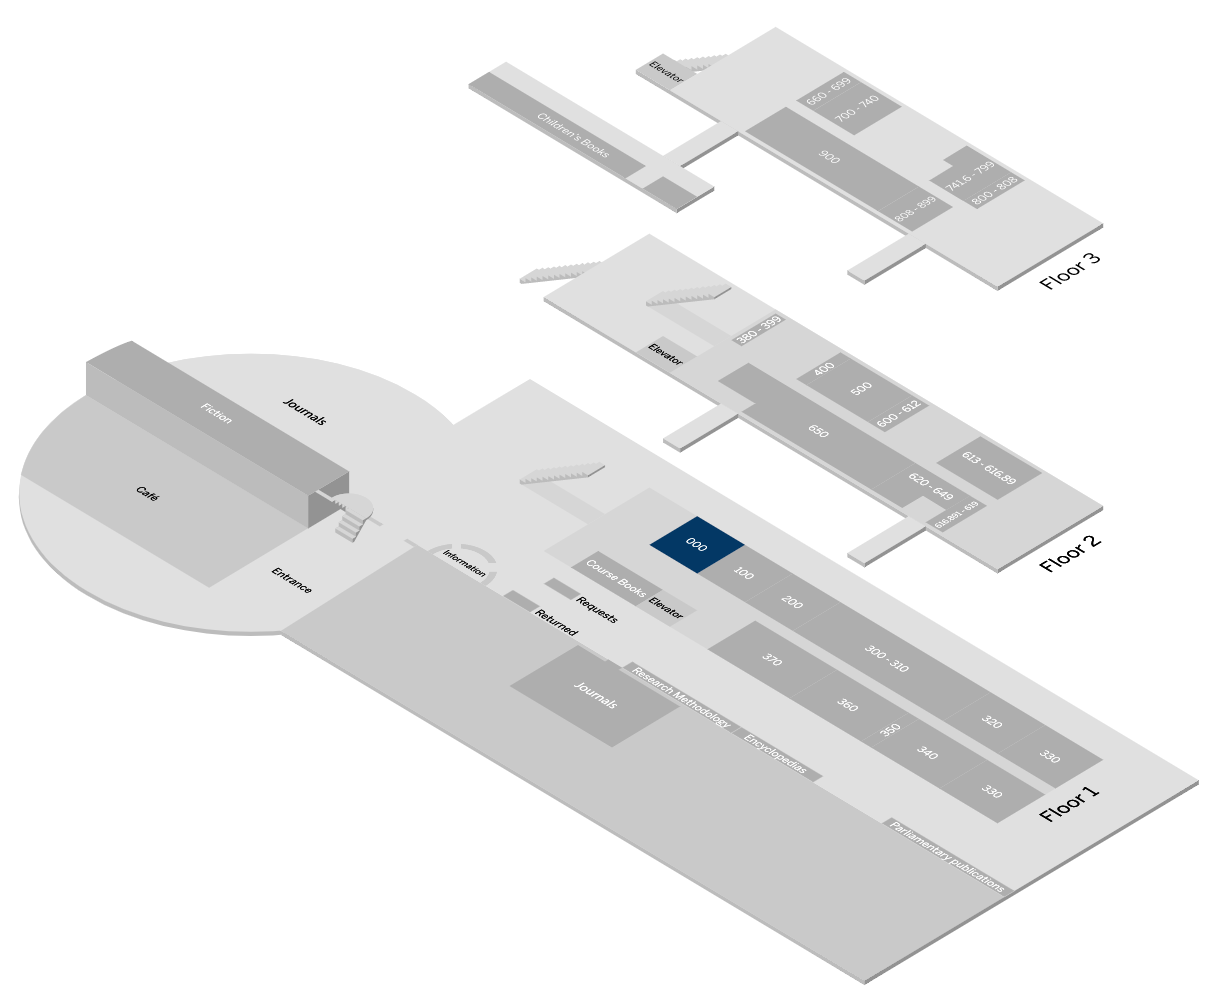 Map of the library showcasing how the highlight feature is displayed.